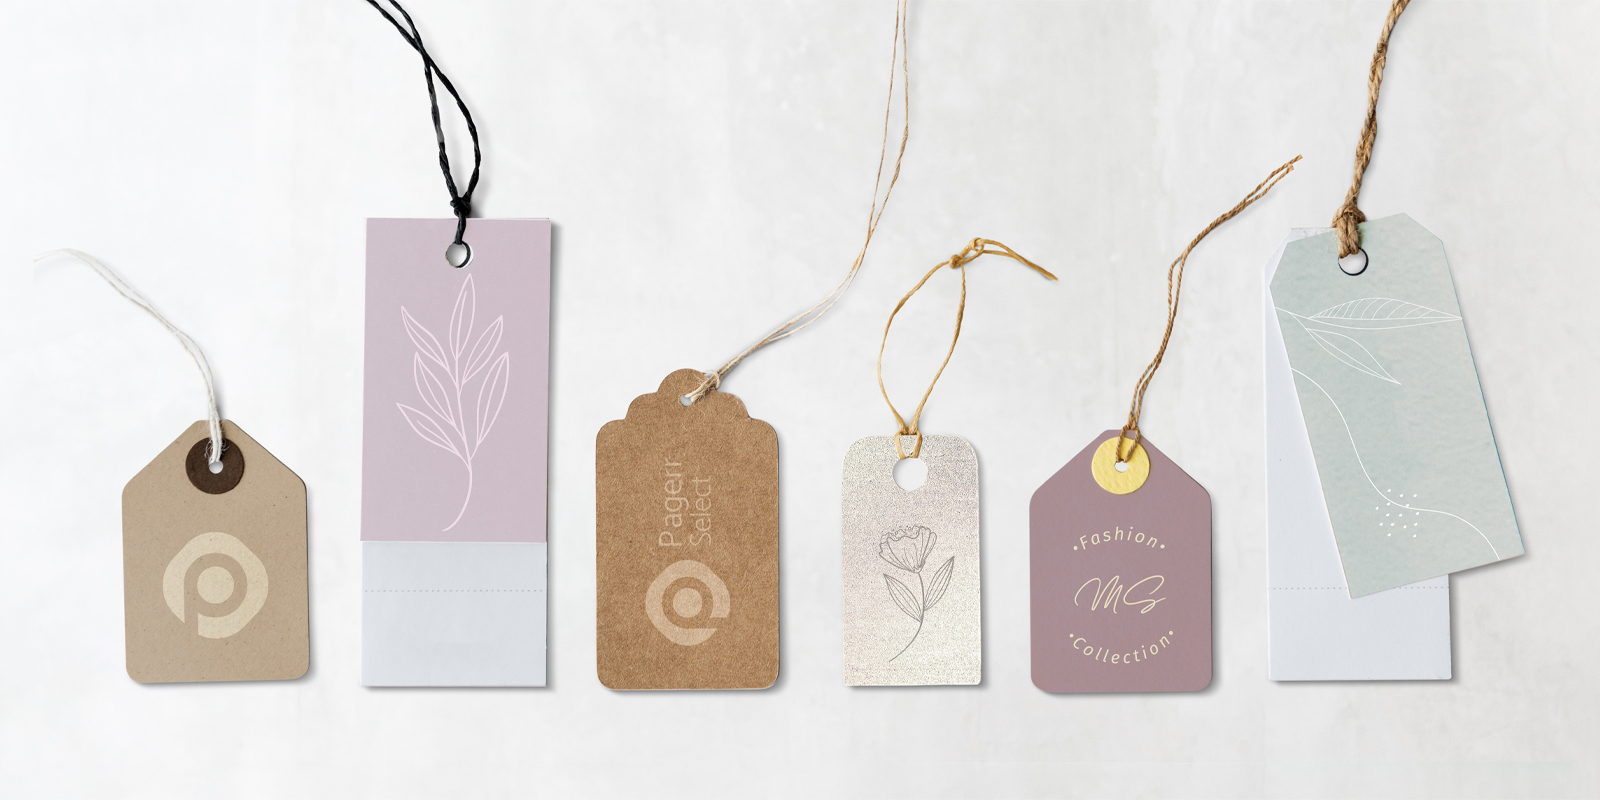 Product tags in Toowoomba - Print with Pagerr